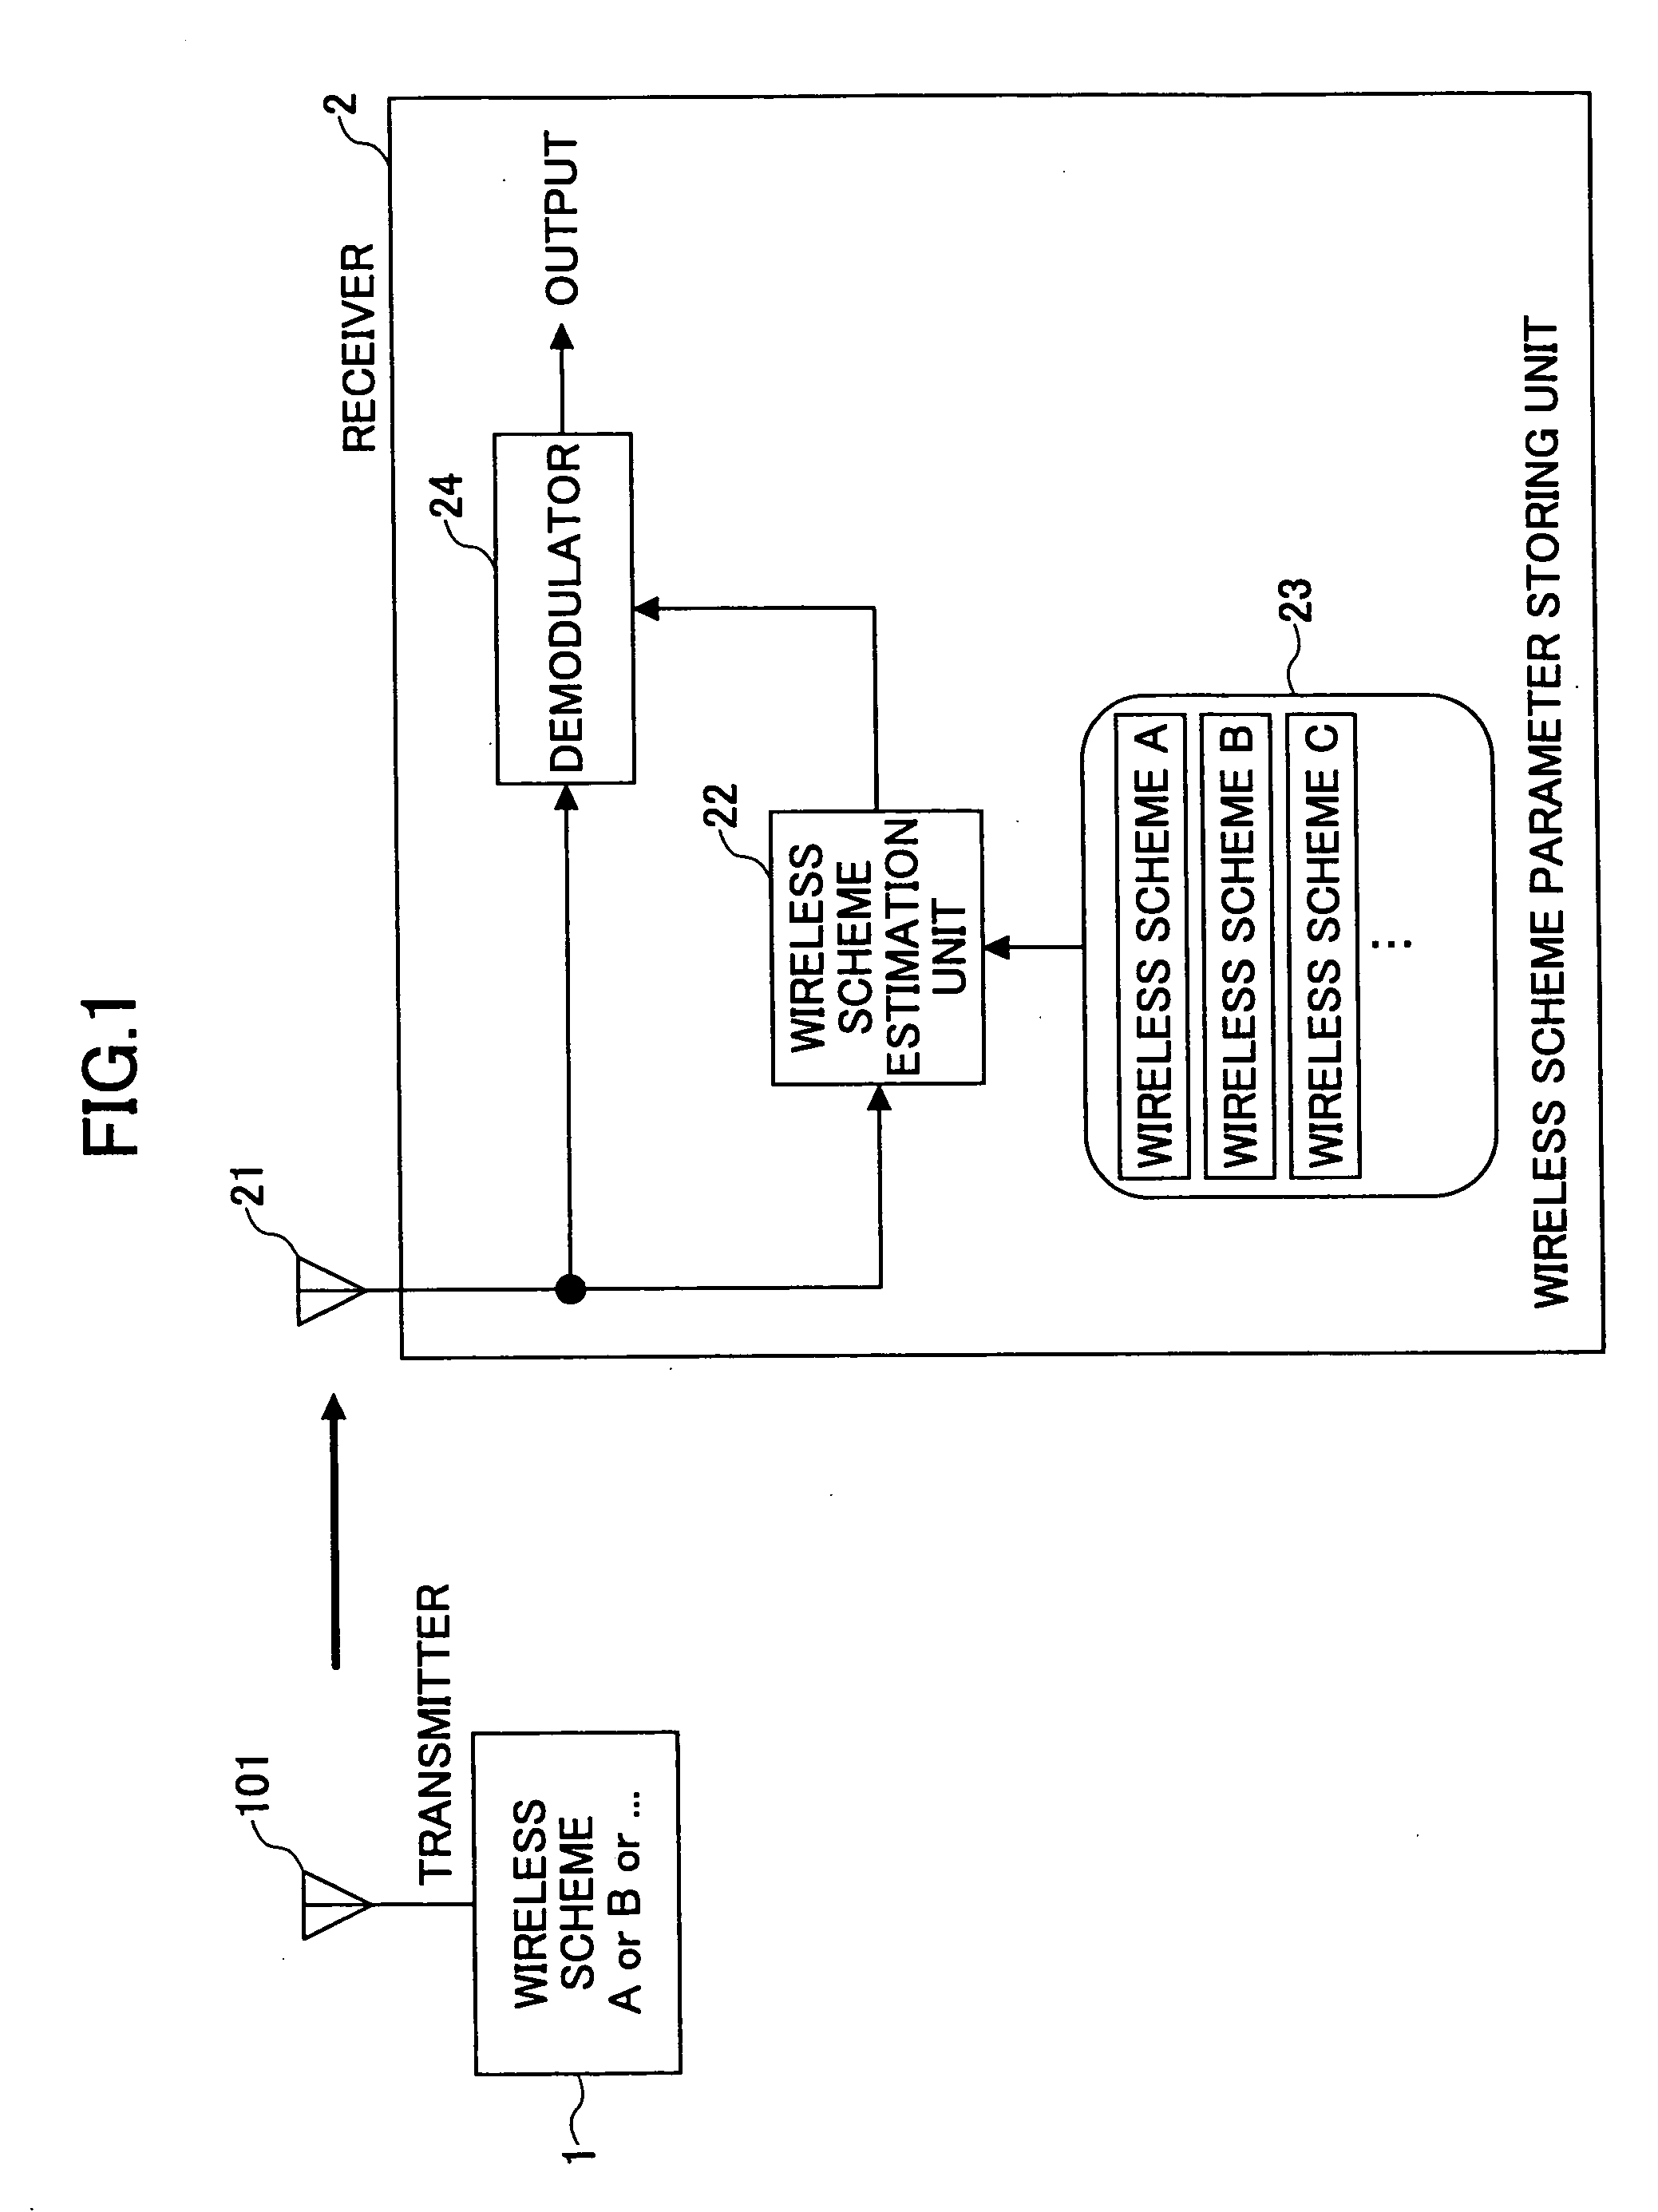 Mobile communication receiver and transmitter